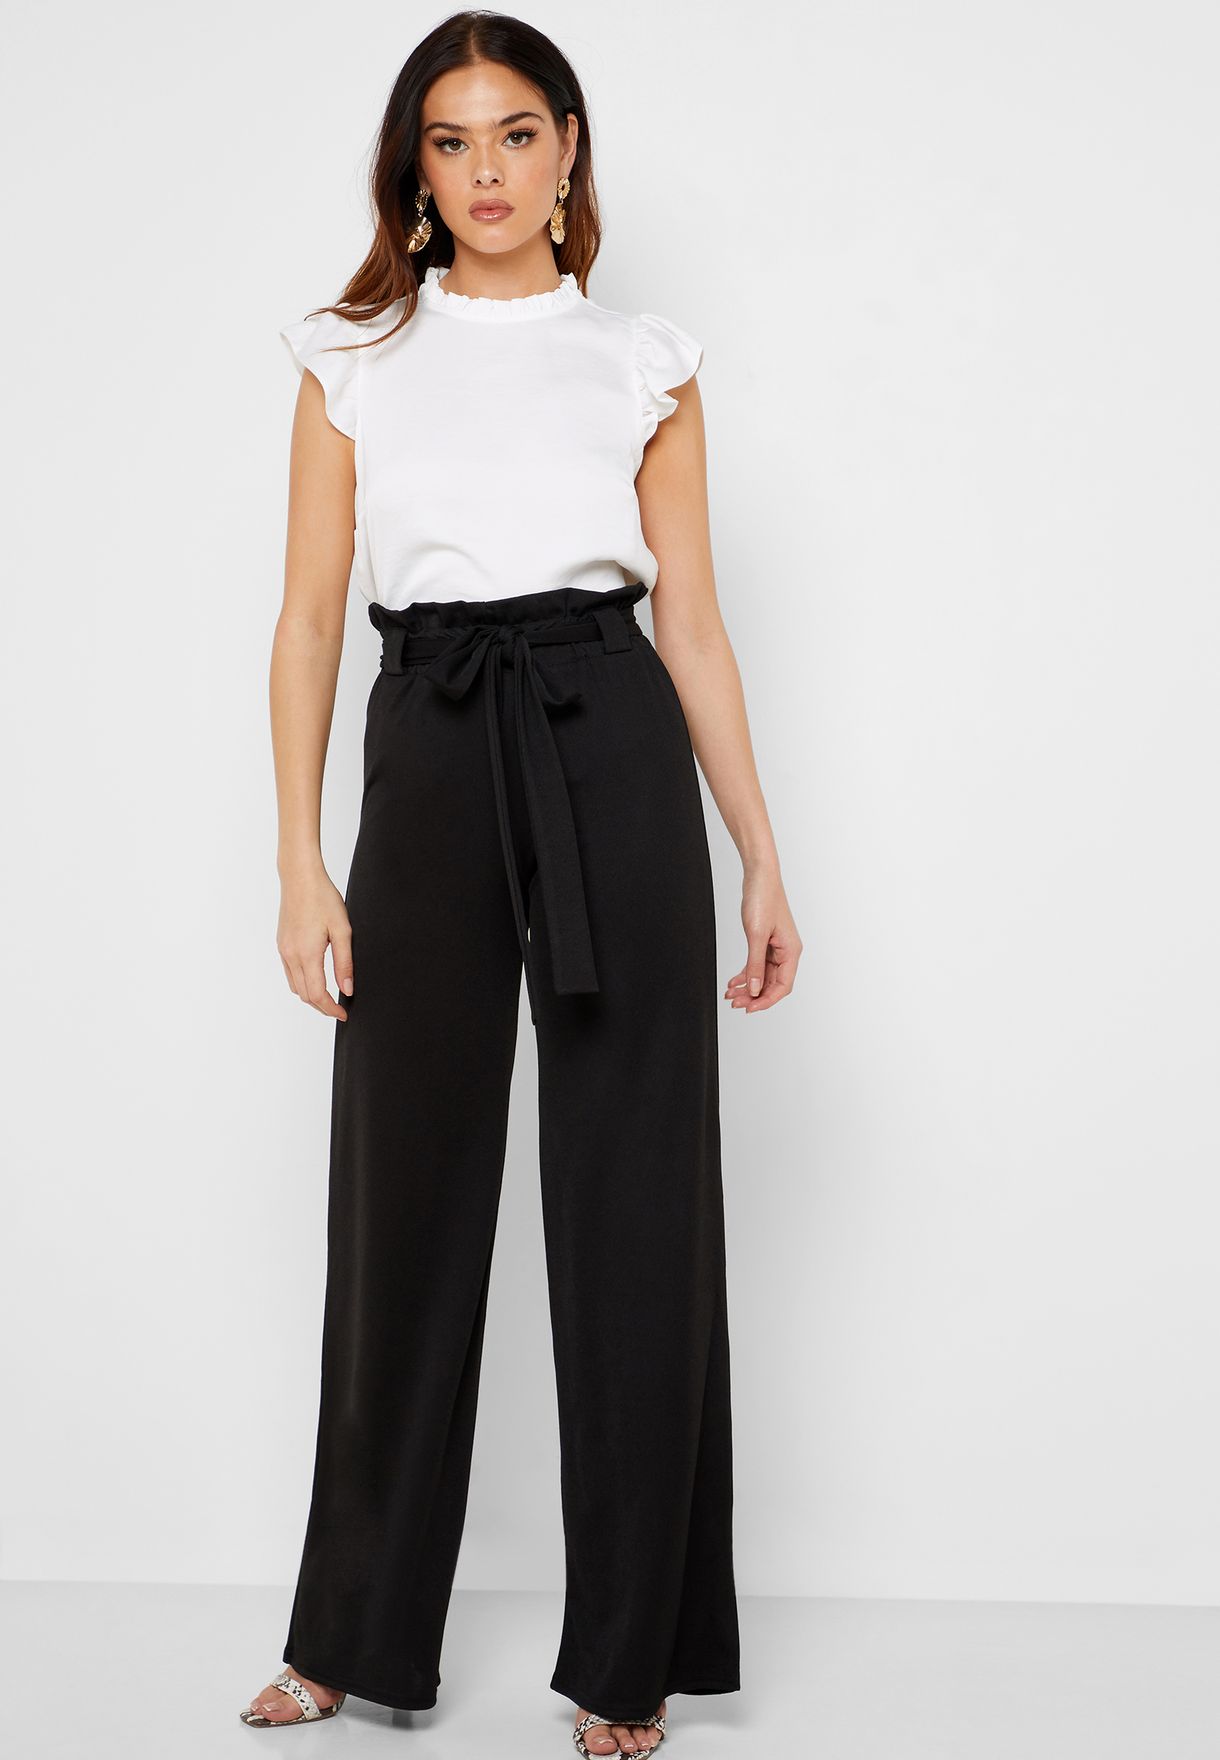 black paperbag pants outfit